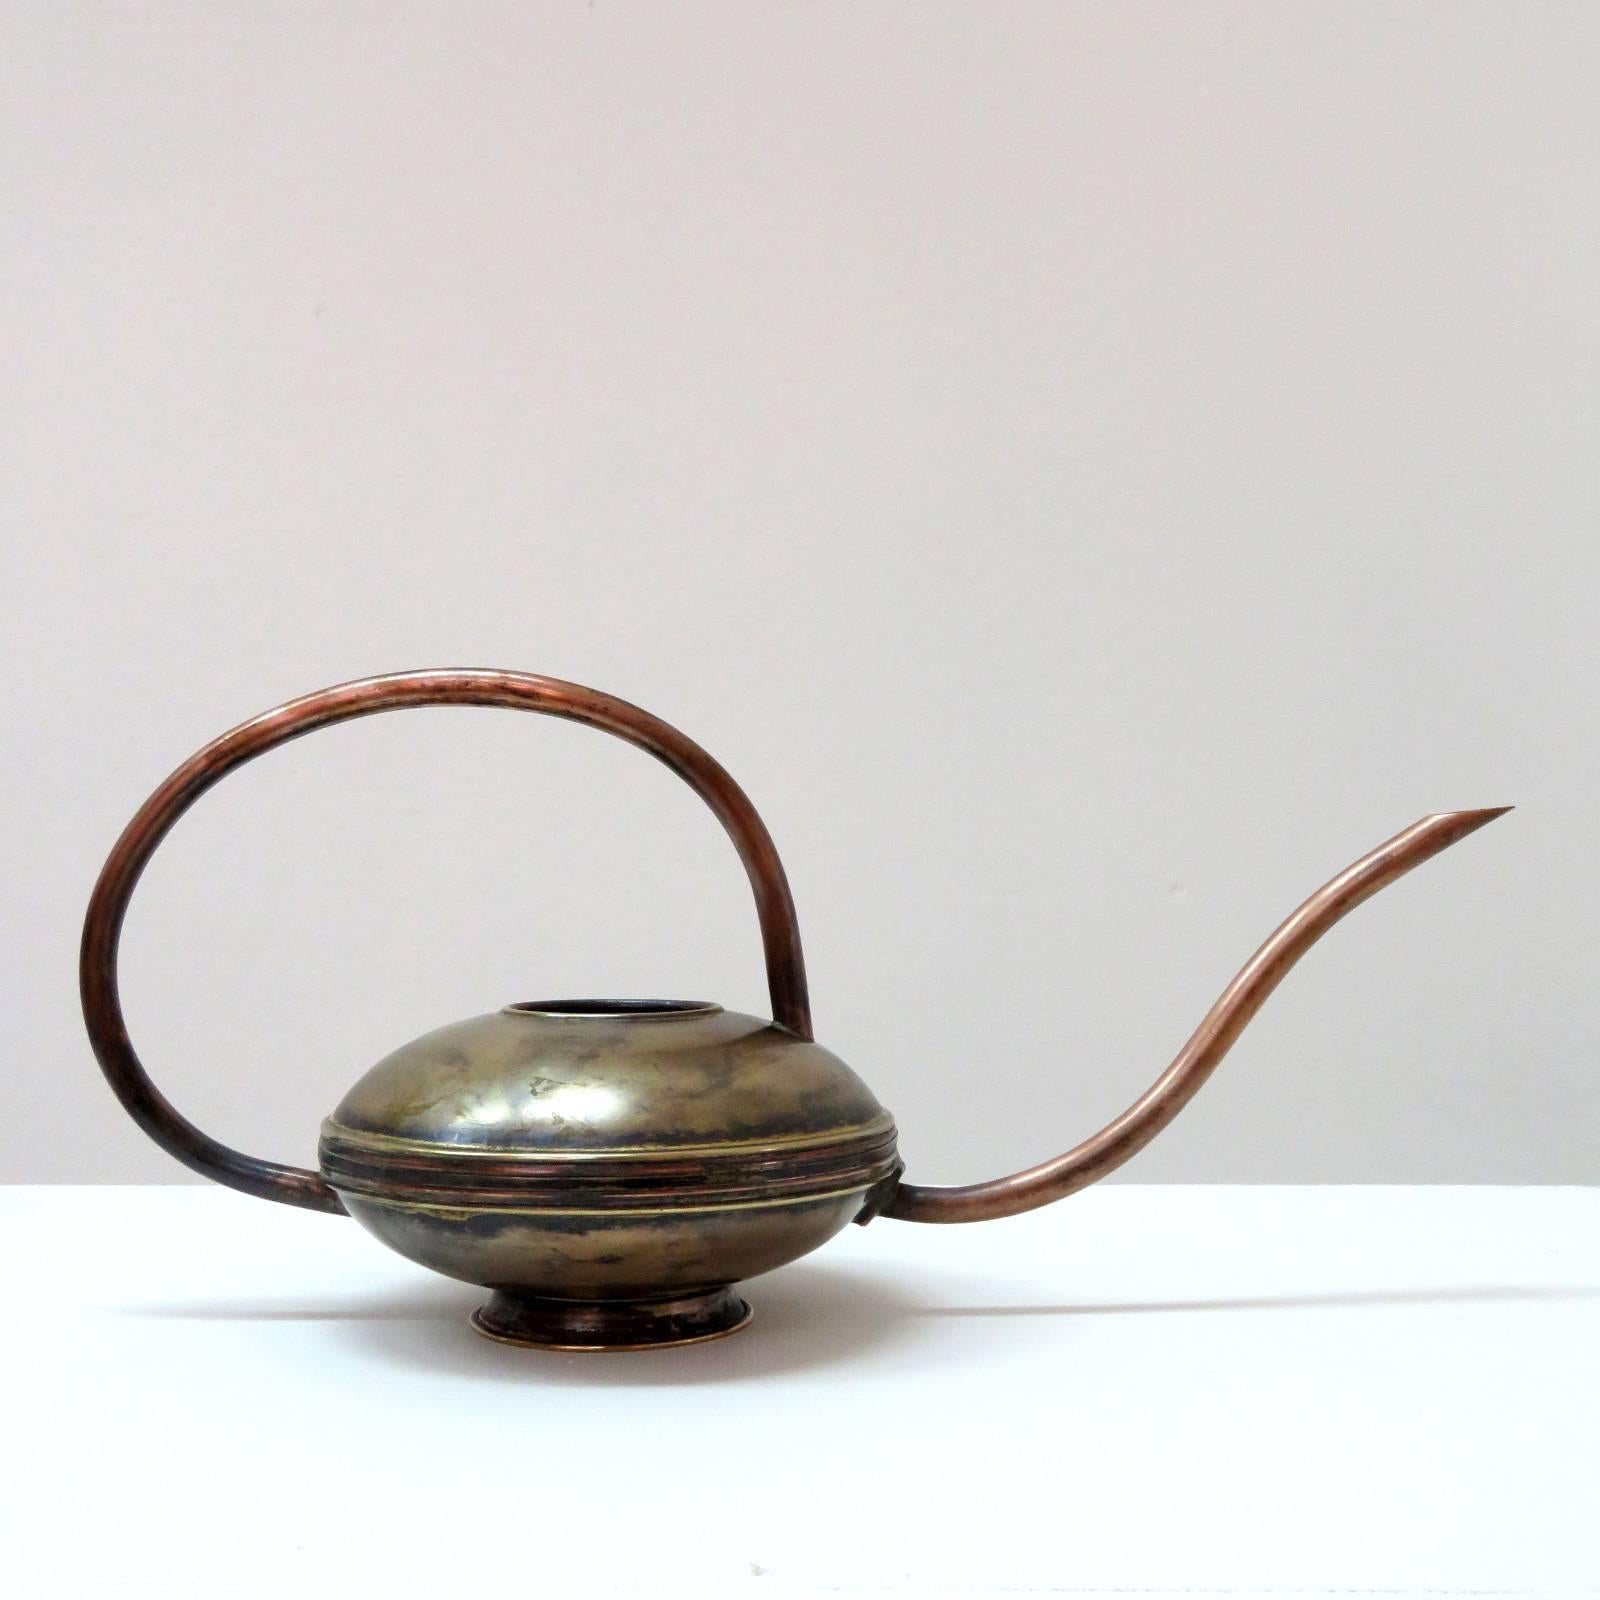 Sculptural 1950s German brass and copper succulent watering can, great lines, great original condition with wonderful patina.